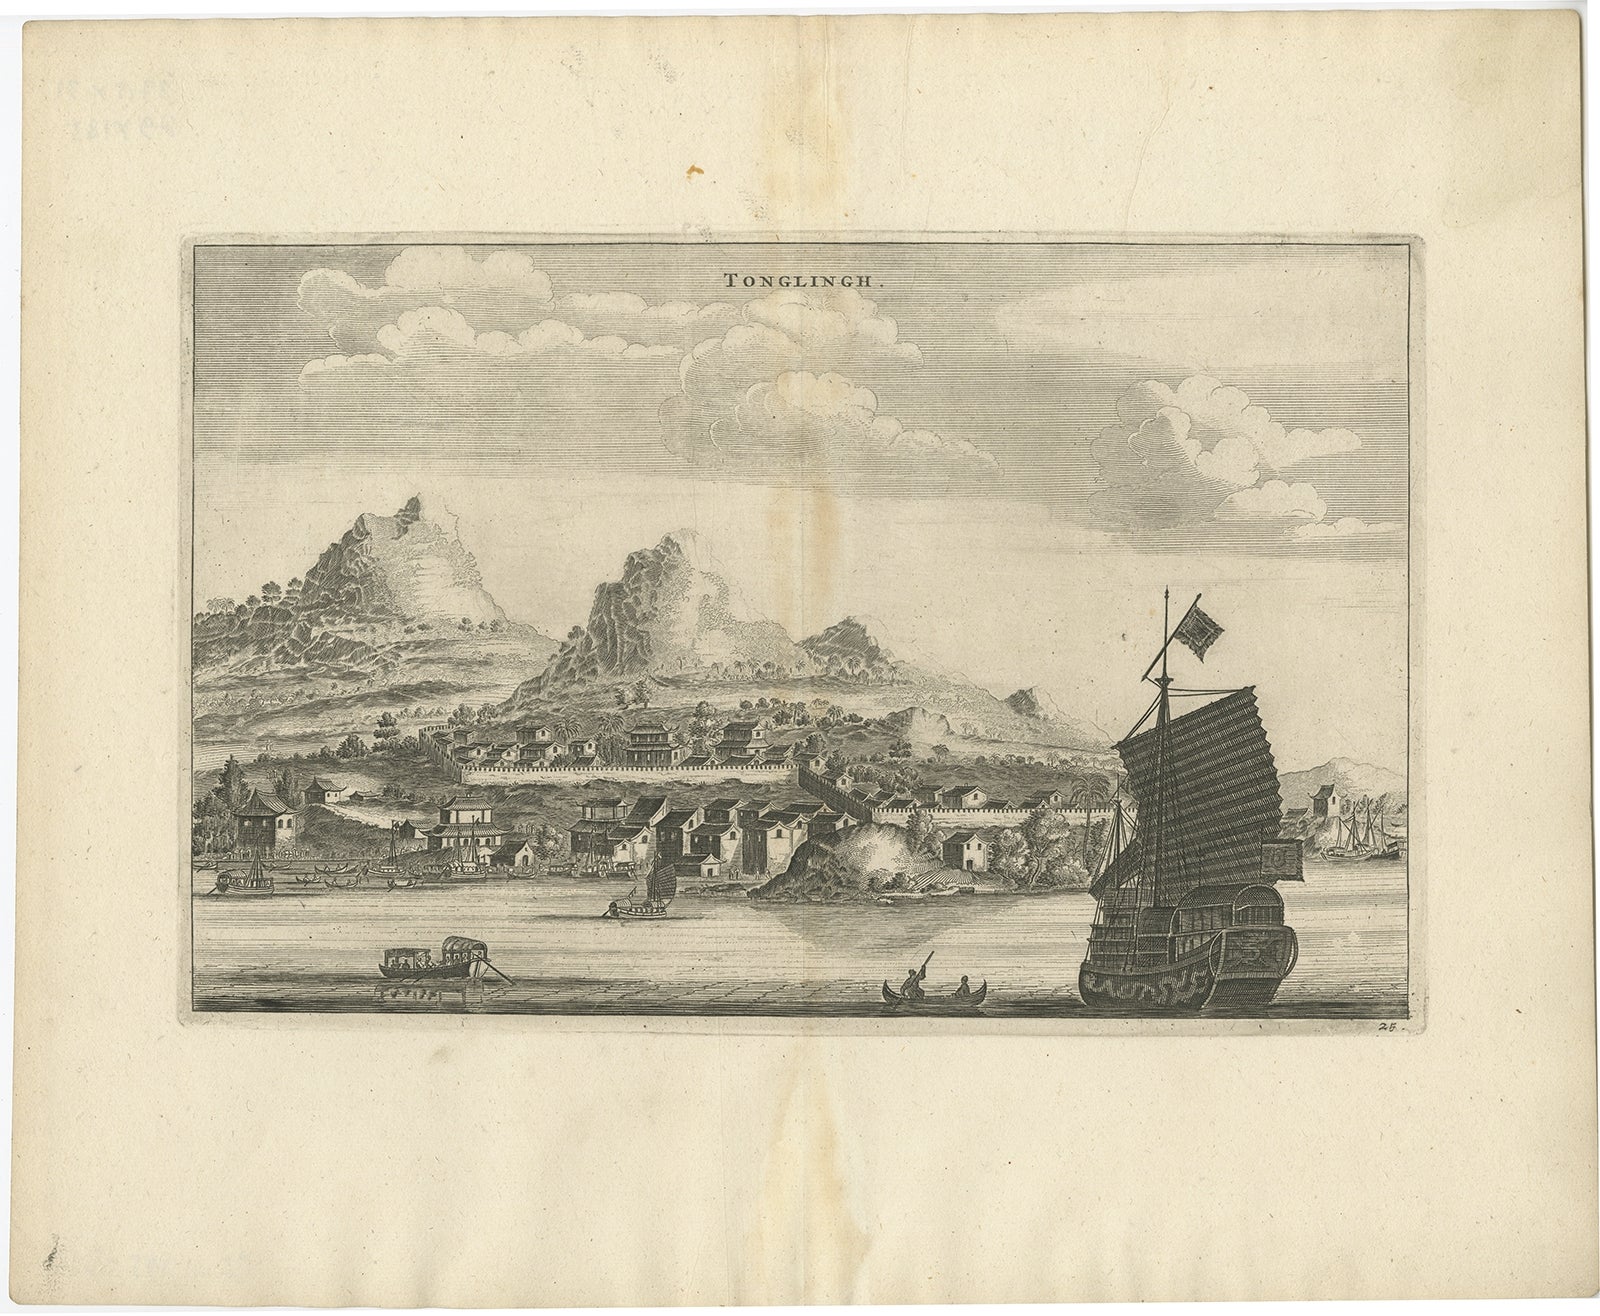 Antique Print of the City of Tonglingh in China, 1668